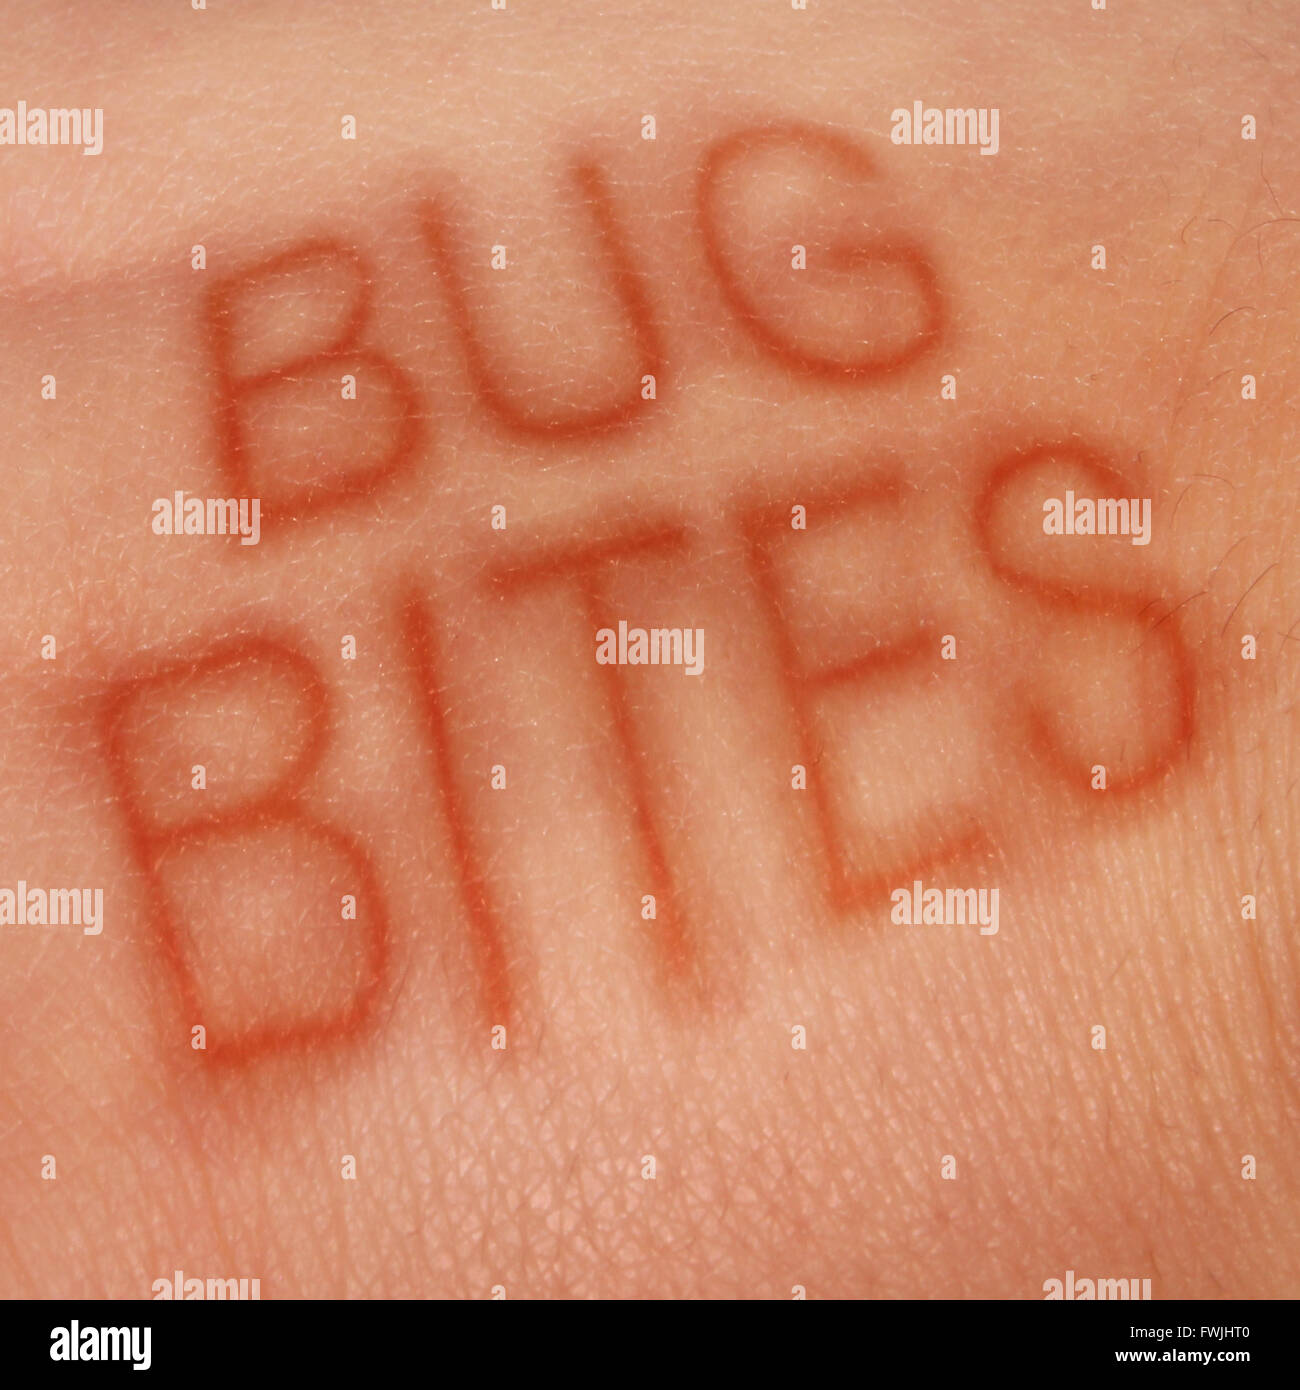 Bug bites medical concept and health care symbol for insect bite infection or skin irritation as human epidermis with text shaped with sores as for lym disease or dengue fever or zika virus and malaria. Stock Photo